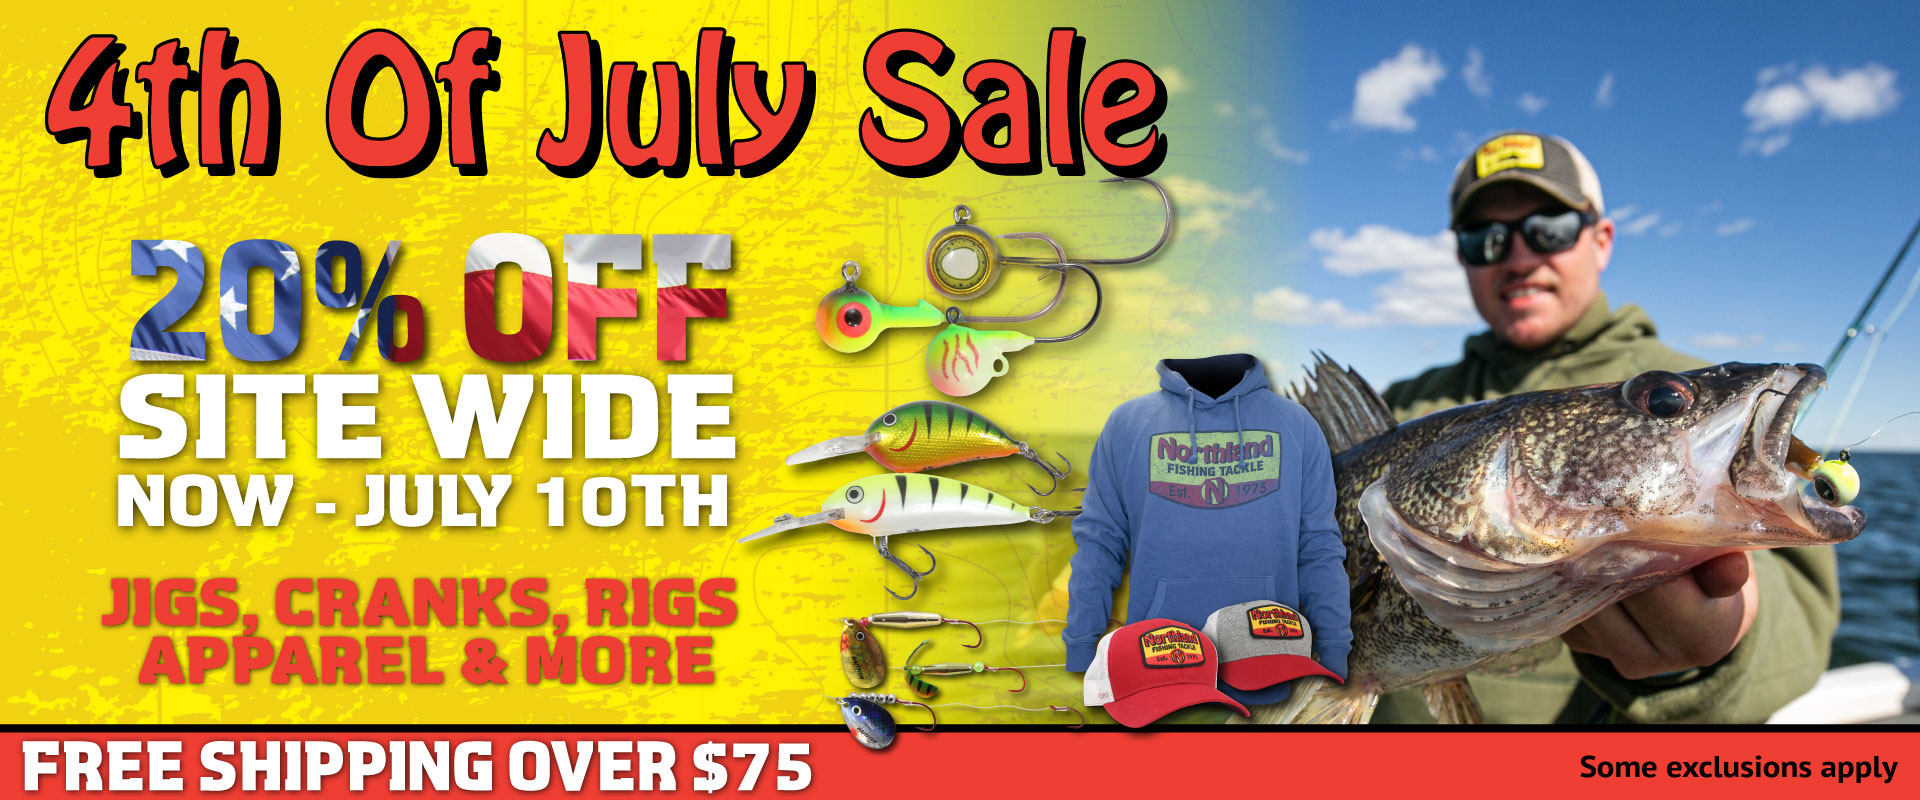 20% off all of Northland Fishing Tackle and free shipping over $75